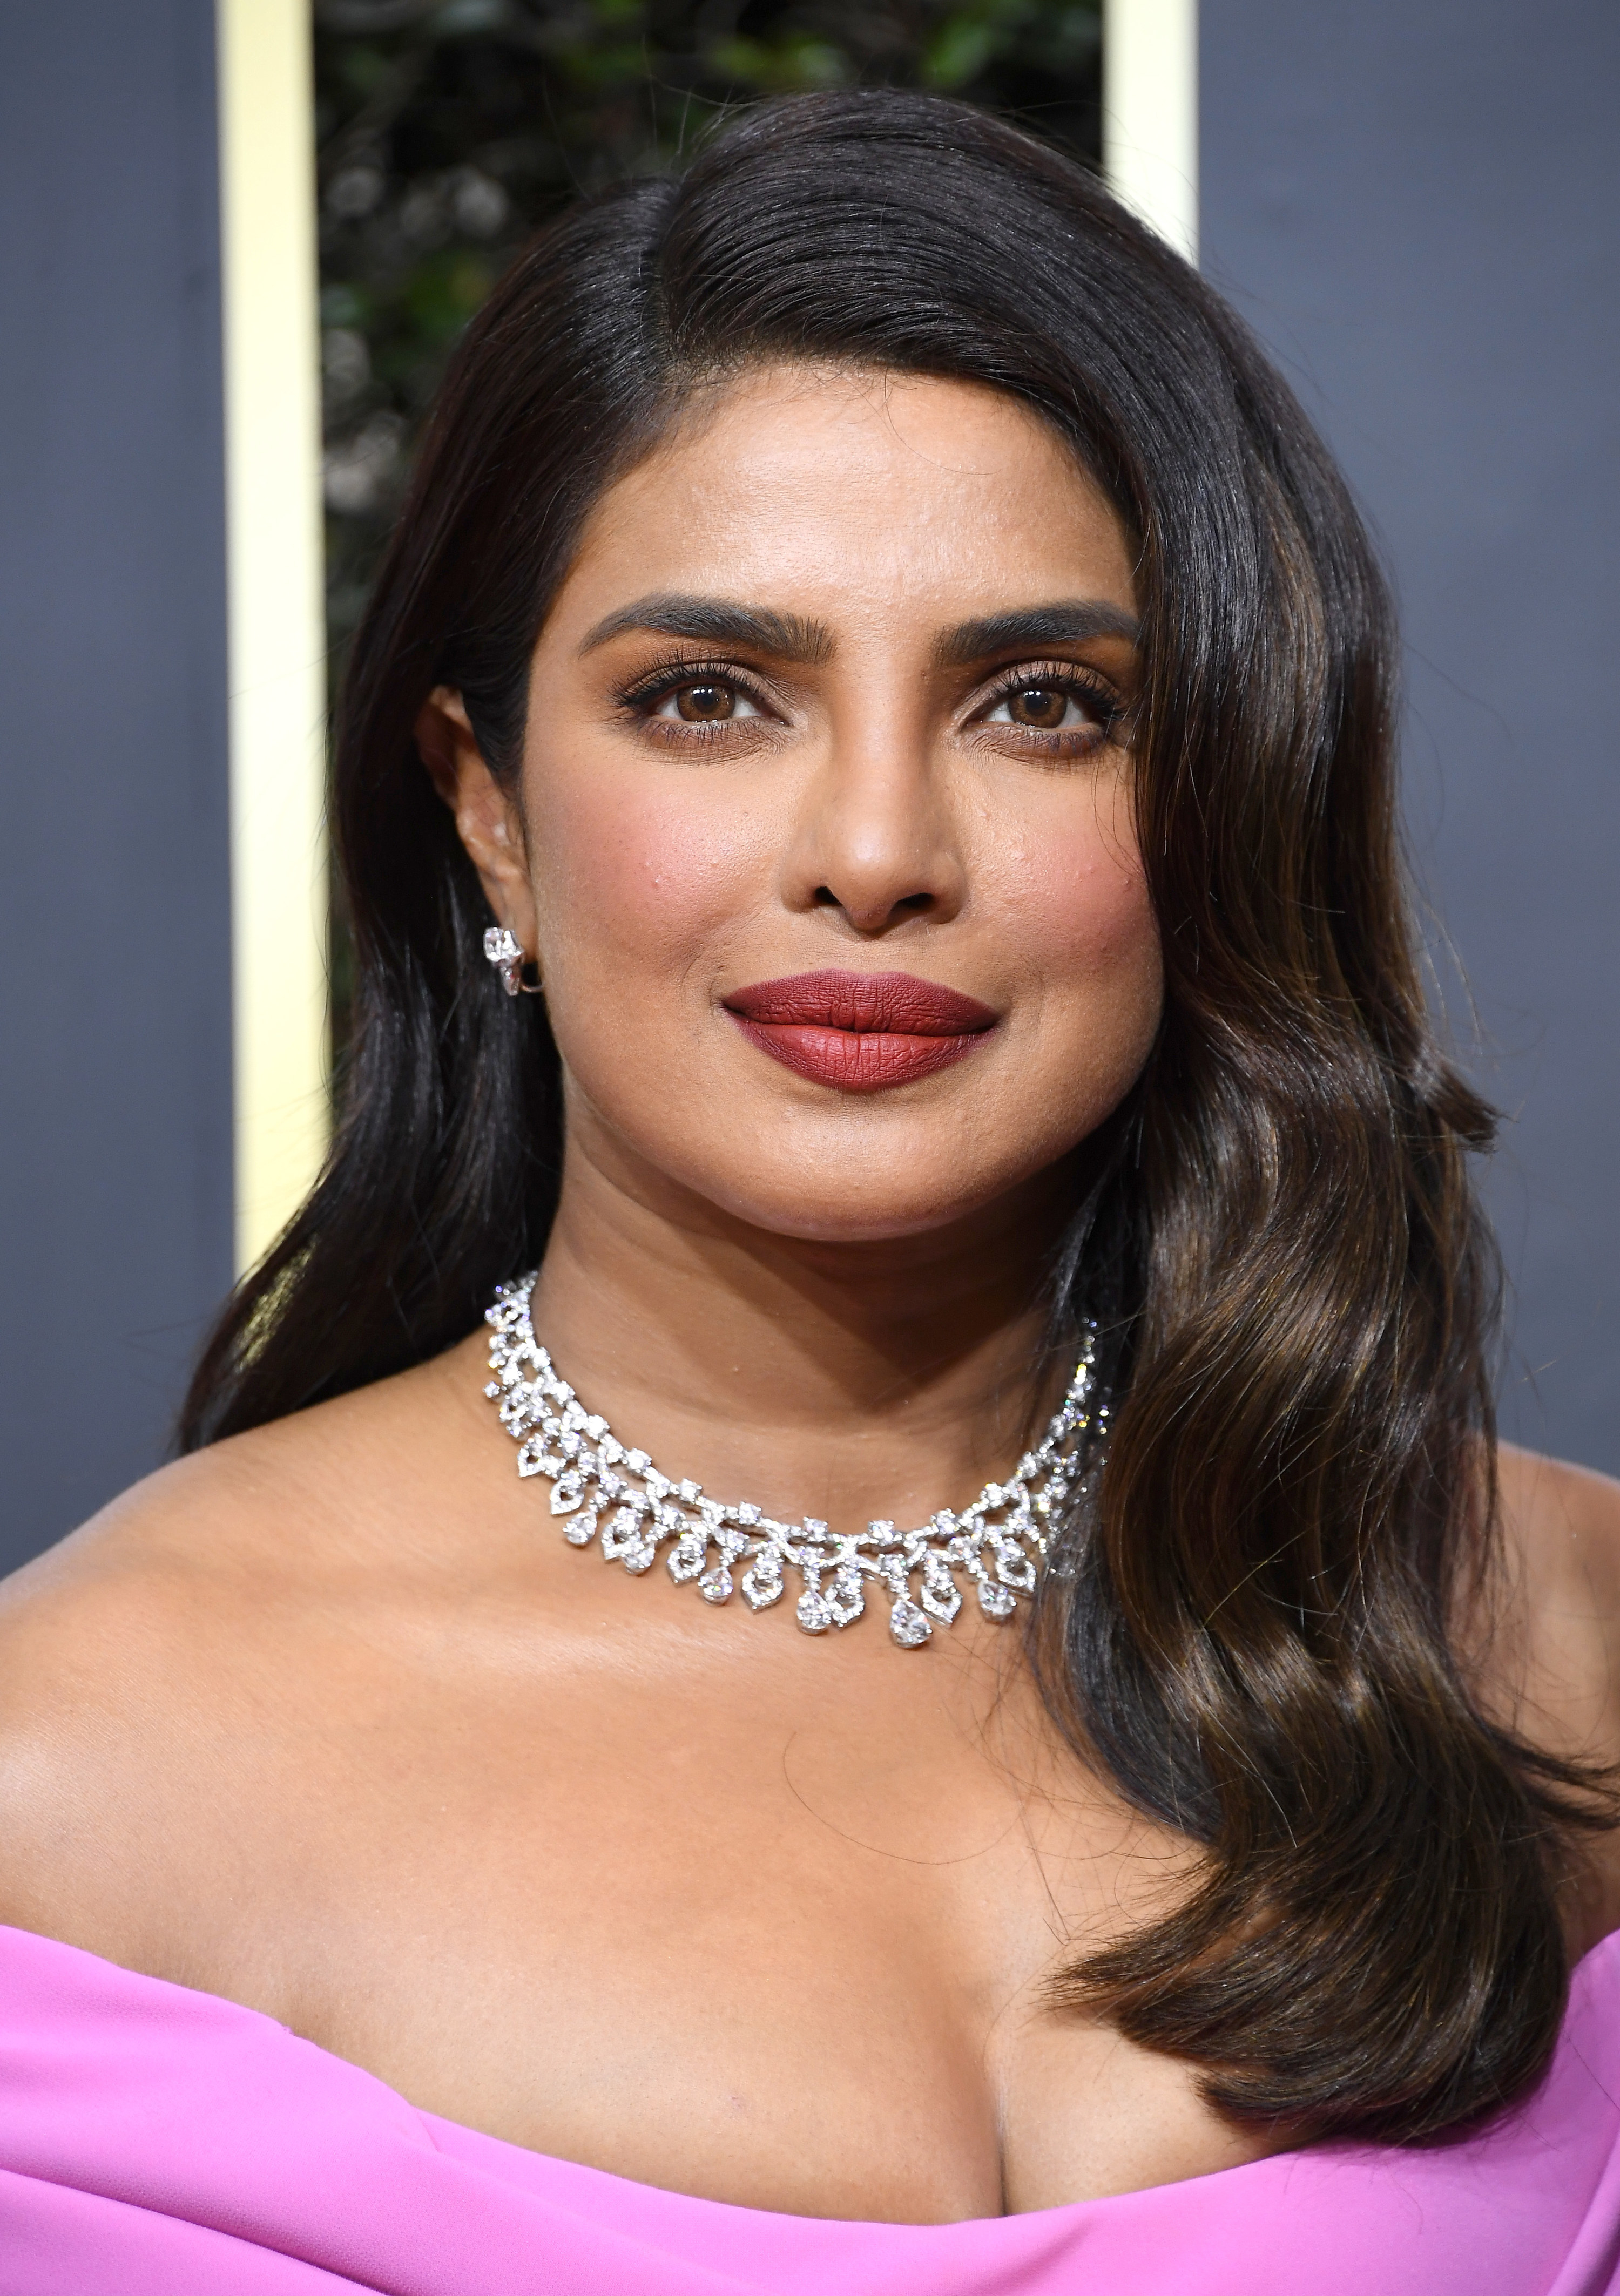 A closeup of Priyanka at a red carpet event where she&#x27;s wearing a diamond necklace and an off-the-shoulder dress